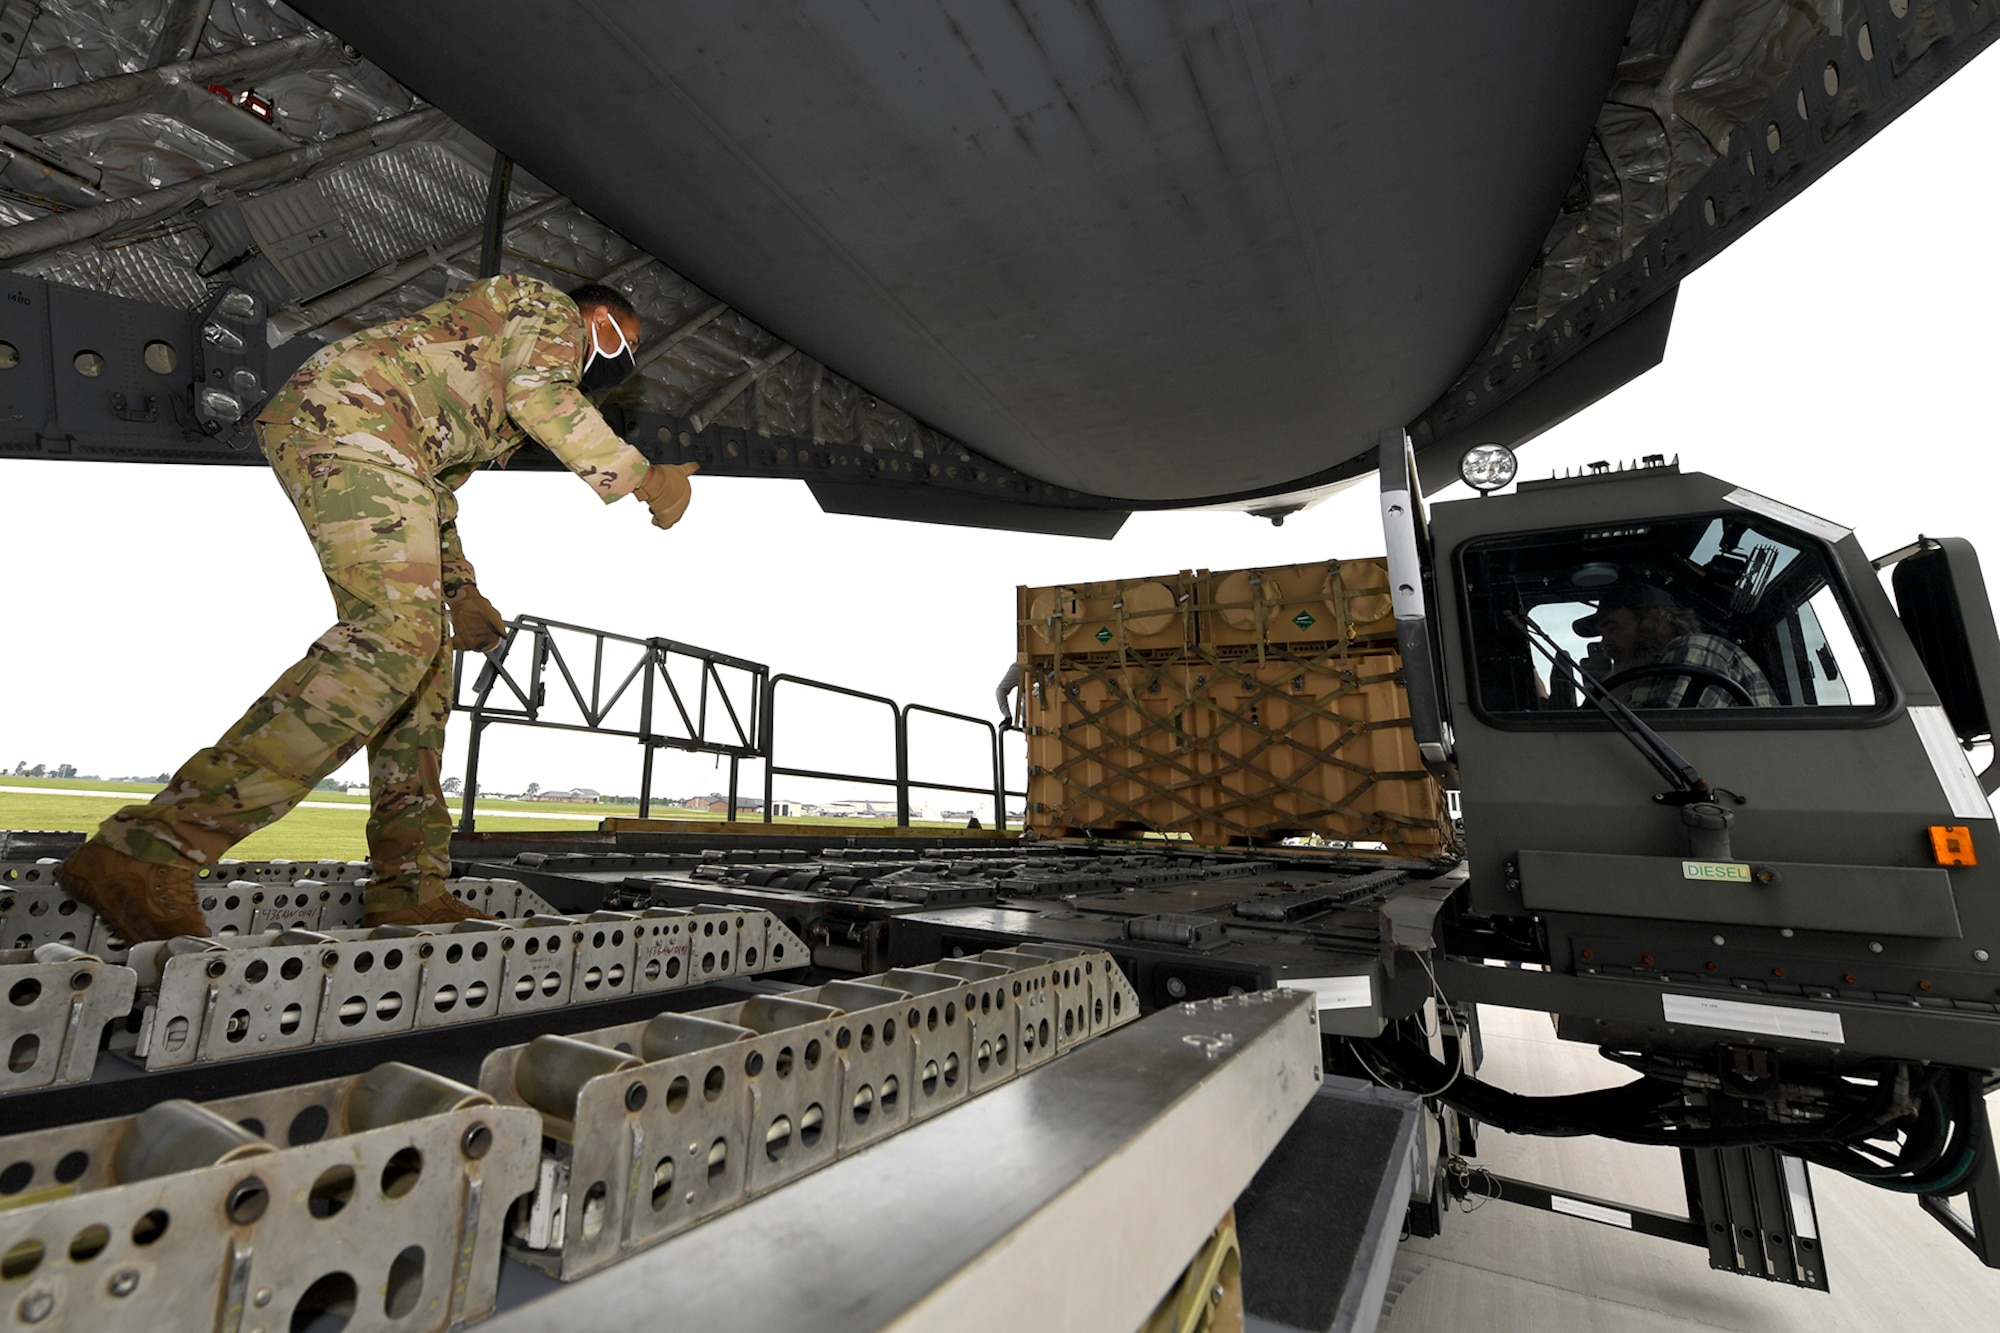 A loadmaster with the 512th Airlift Wing at Dover Air Force Base, Del., directs cargo onto a C-17 Globemaster III, at Grissom Air Reserve Base, Ind., June 1, 2021. Members of Det. 1, 622nd Contingency Equipment Group, Dobbins Air Reserve Base, Ga., palletized and prepared the cargo for shipment to Hawaii to support a joint service exercise called Pacific Warriorz 2021.  (U.S. Air Force photo/Staff Sgt. Chris Massey)